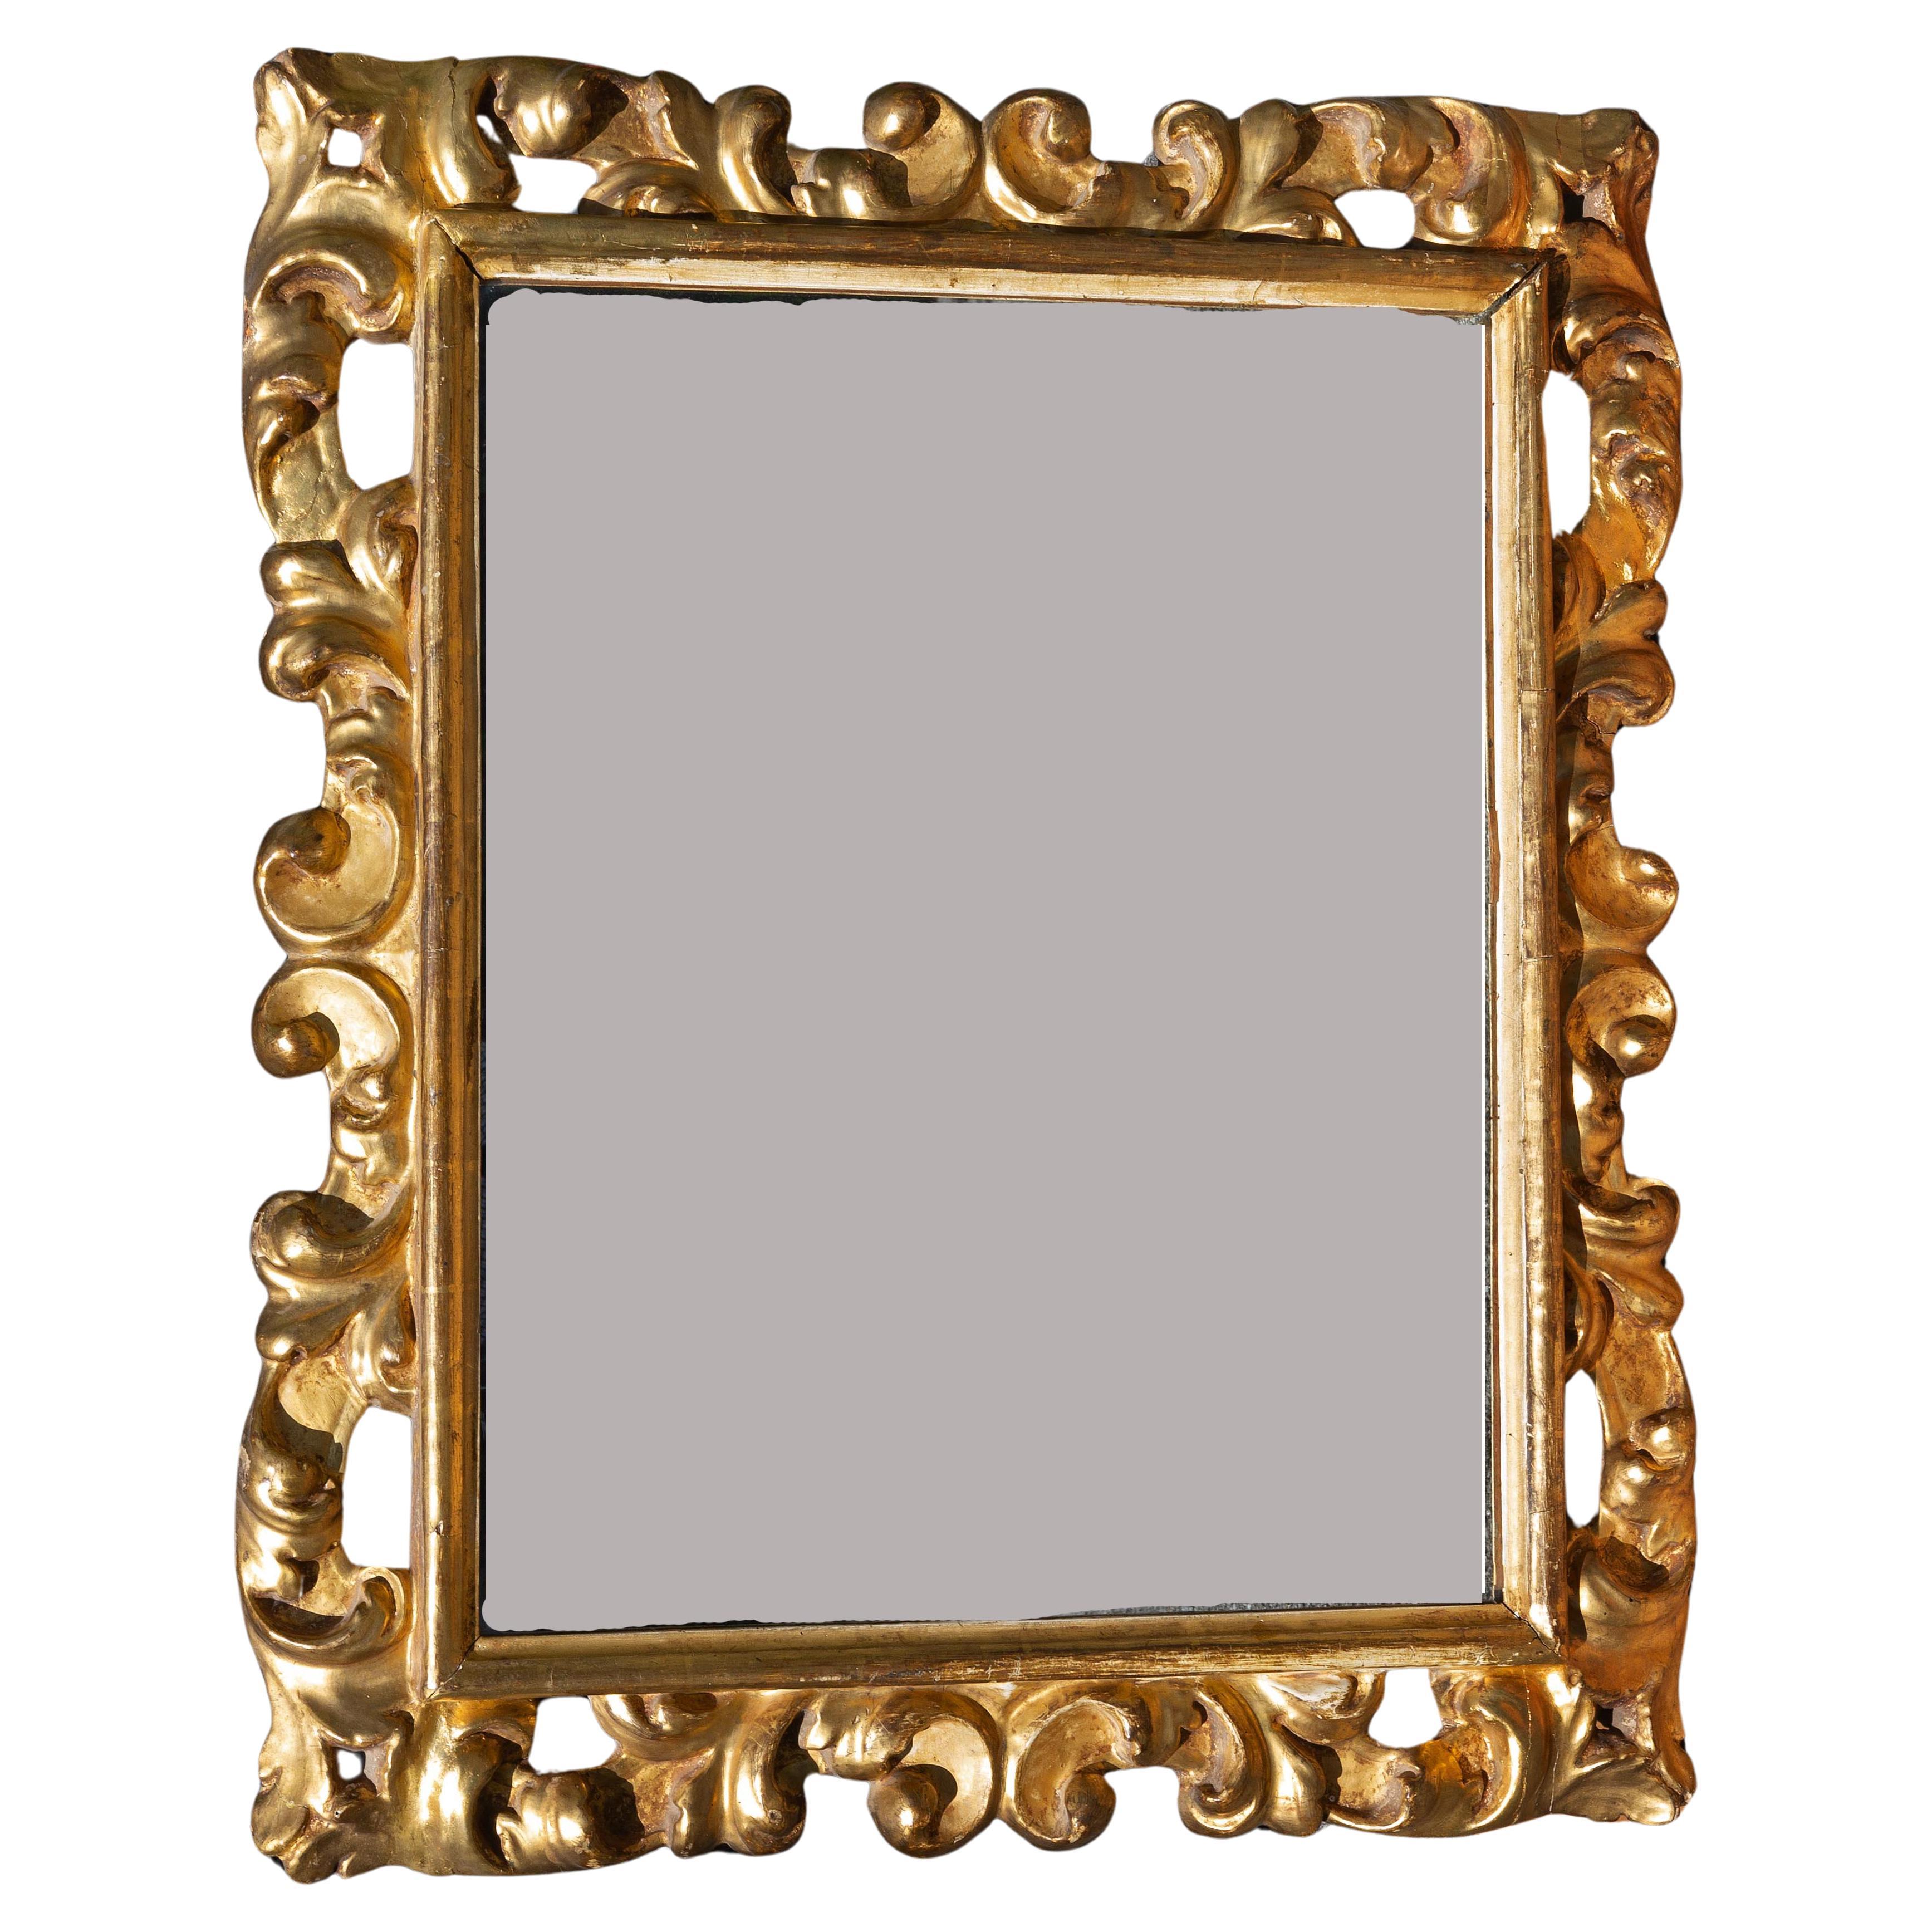 18th century Italian baroque style mirror. Hand carved with gold leaf gilding. 